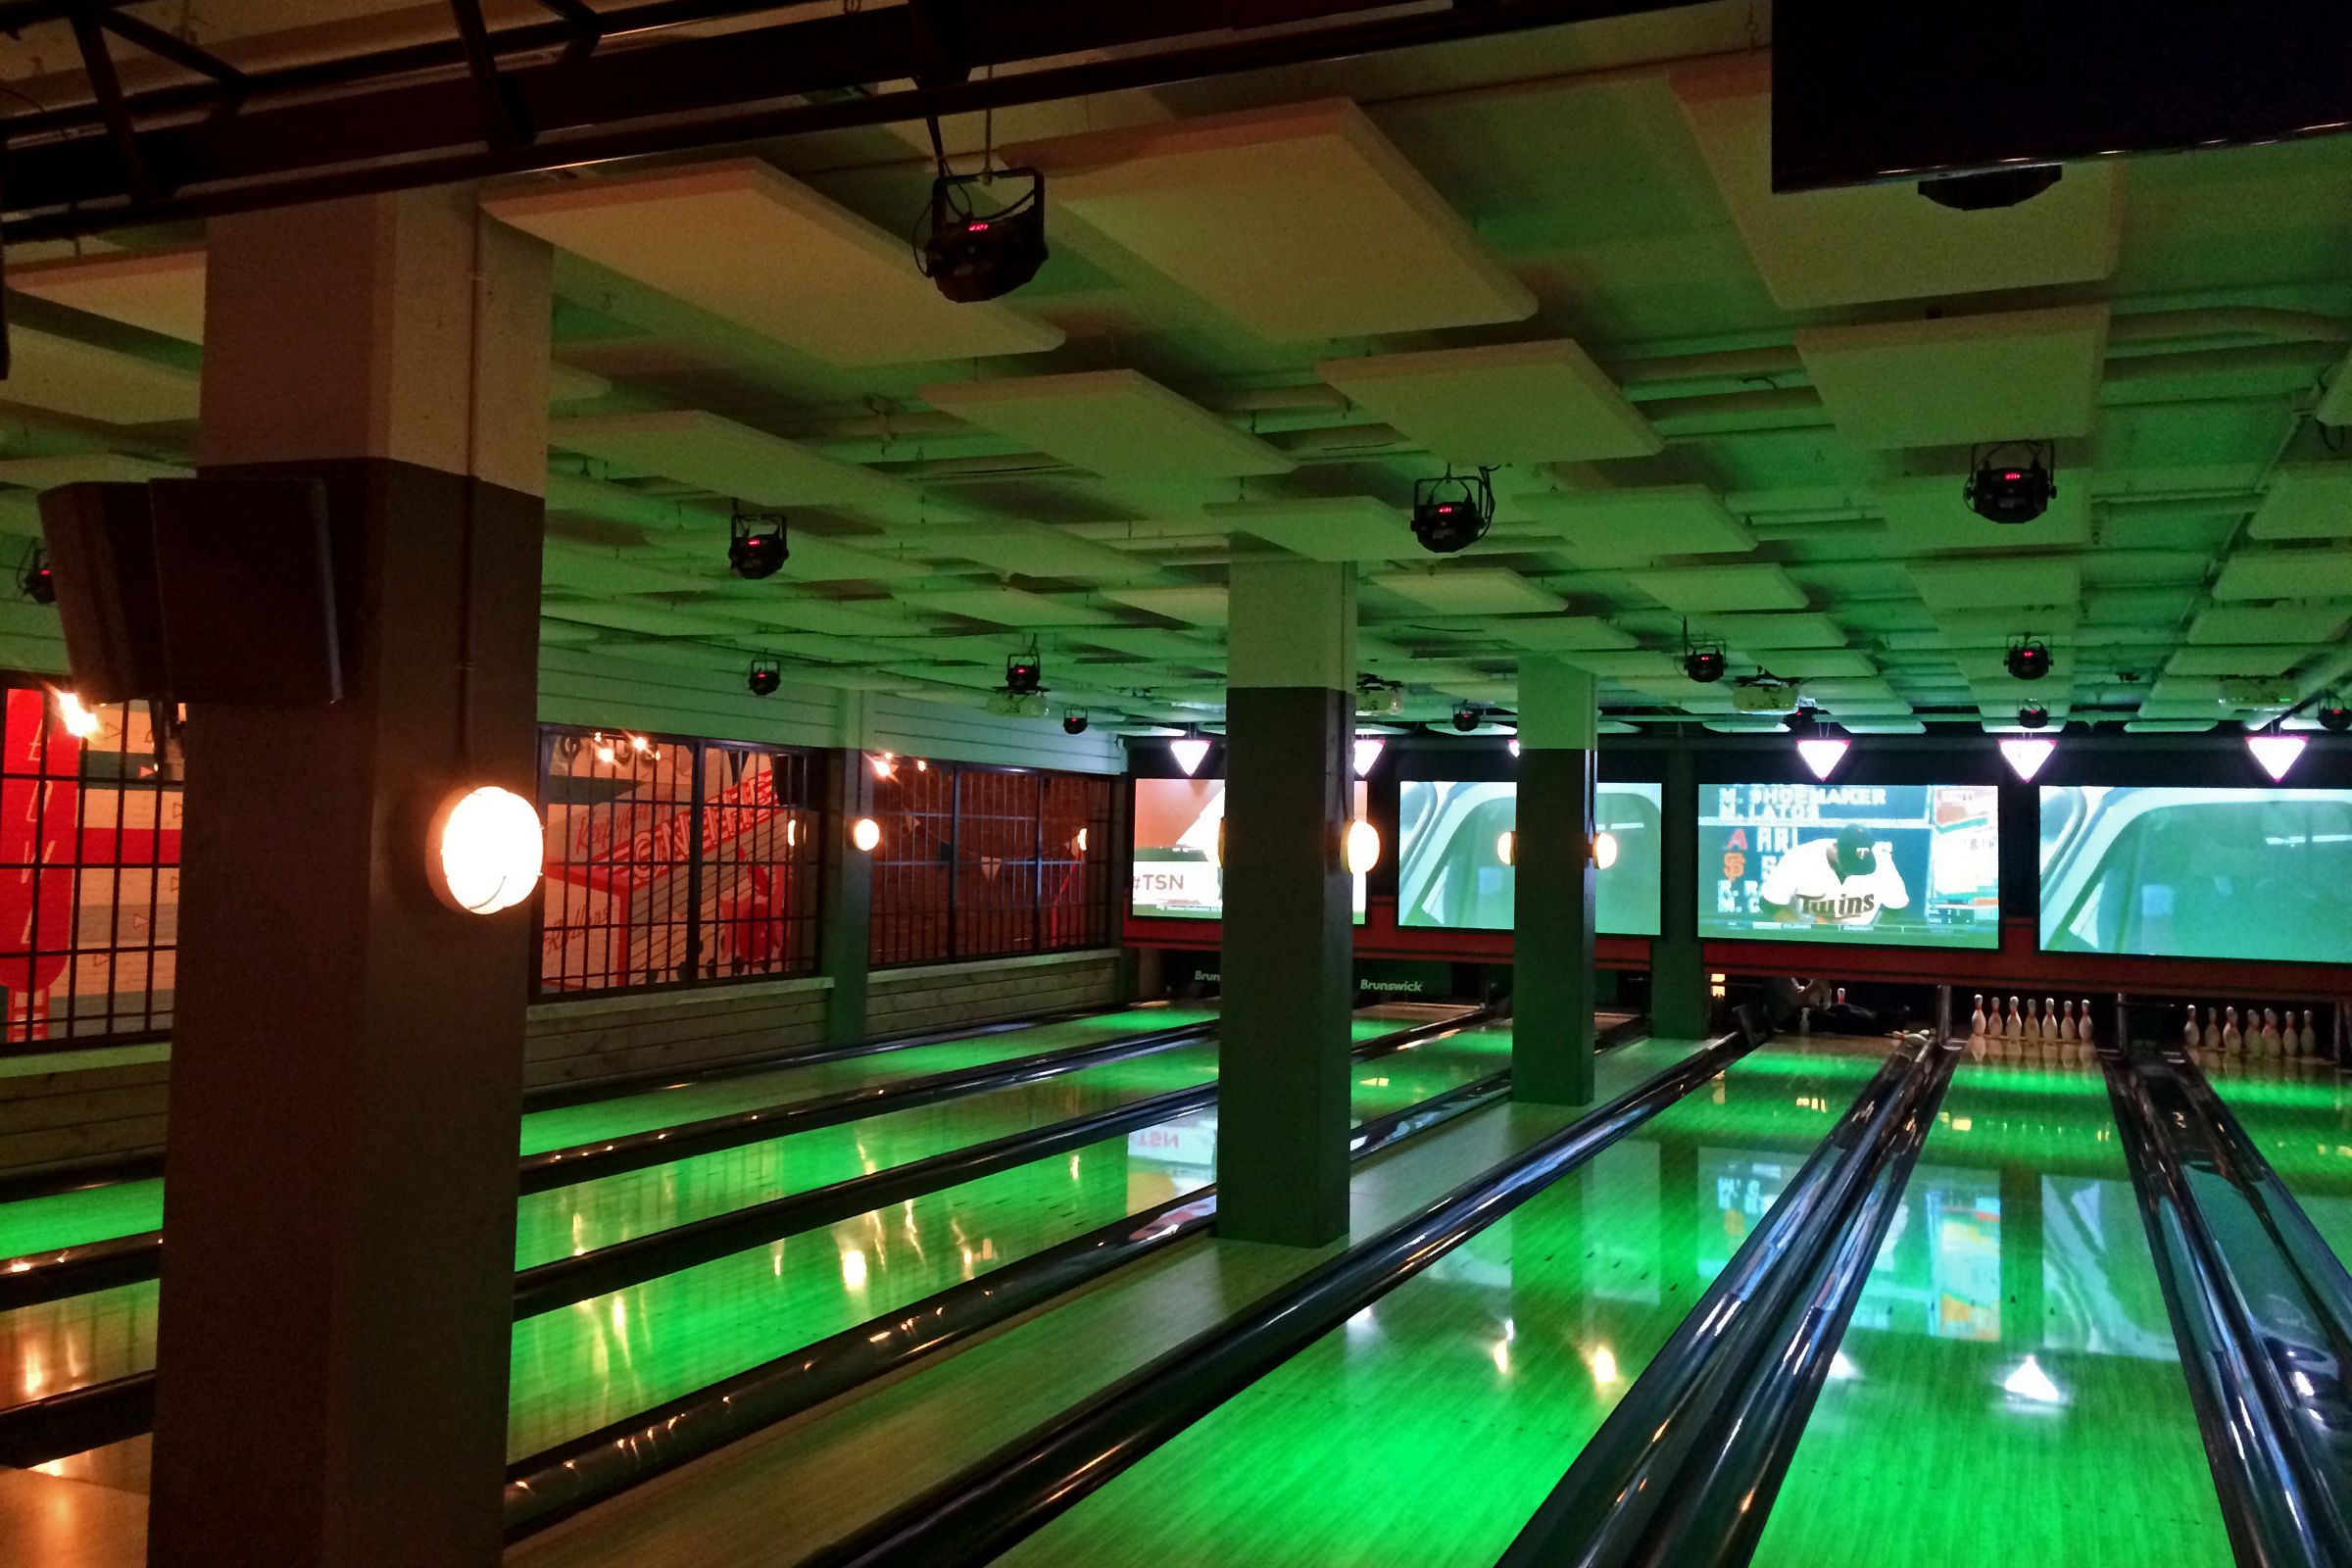 Bowling lanes with beige acoustic panels on ceiling above and green light shining